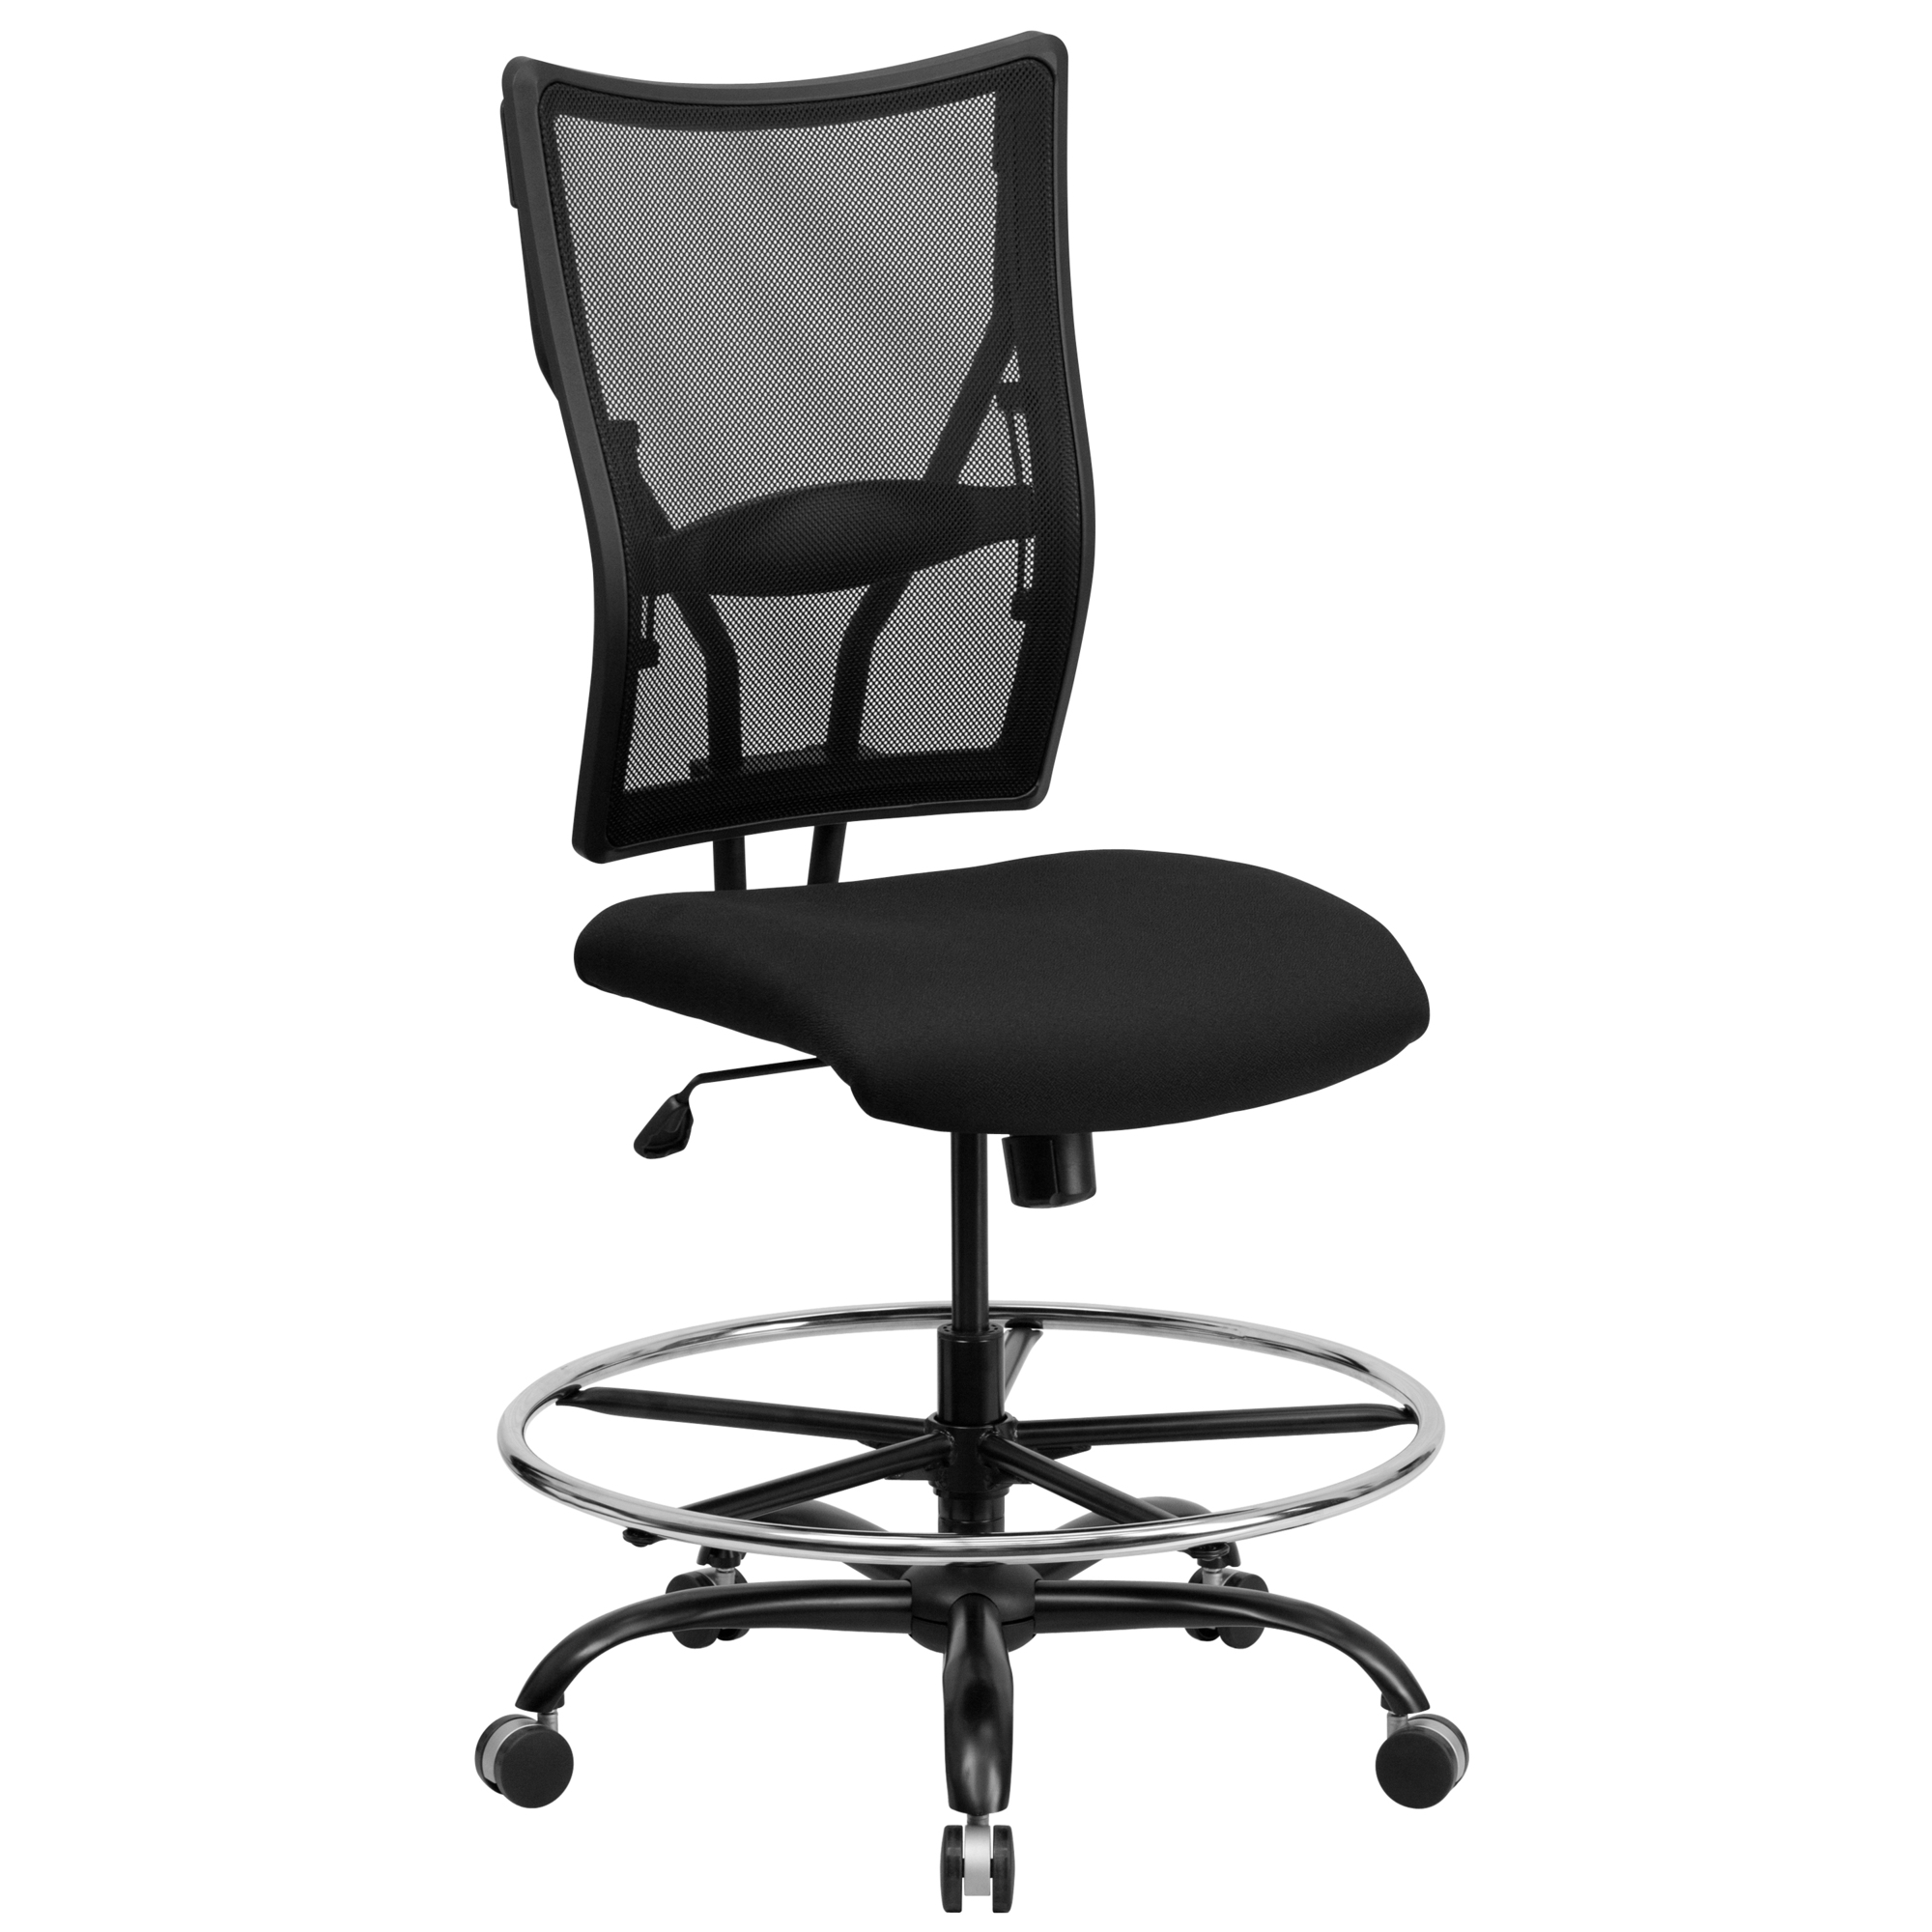 Flash Furniture, Big Tall 400 lb. Rated Black Mesh Drafting Chair, Primary Color Black, Included (qty.) 1, Model WL5029SYGD